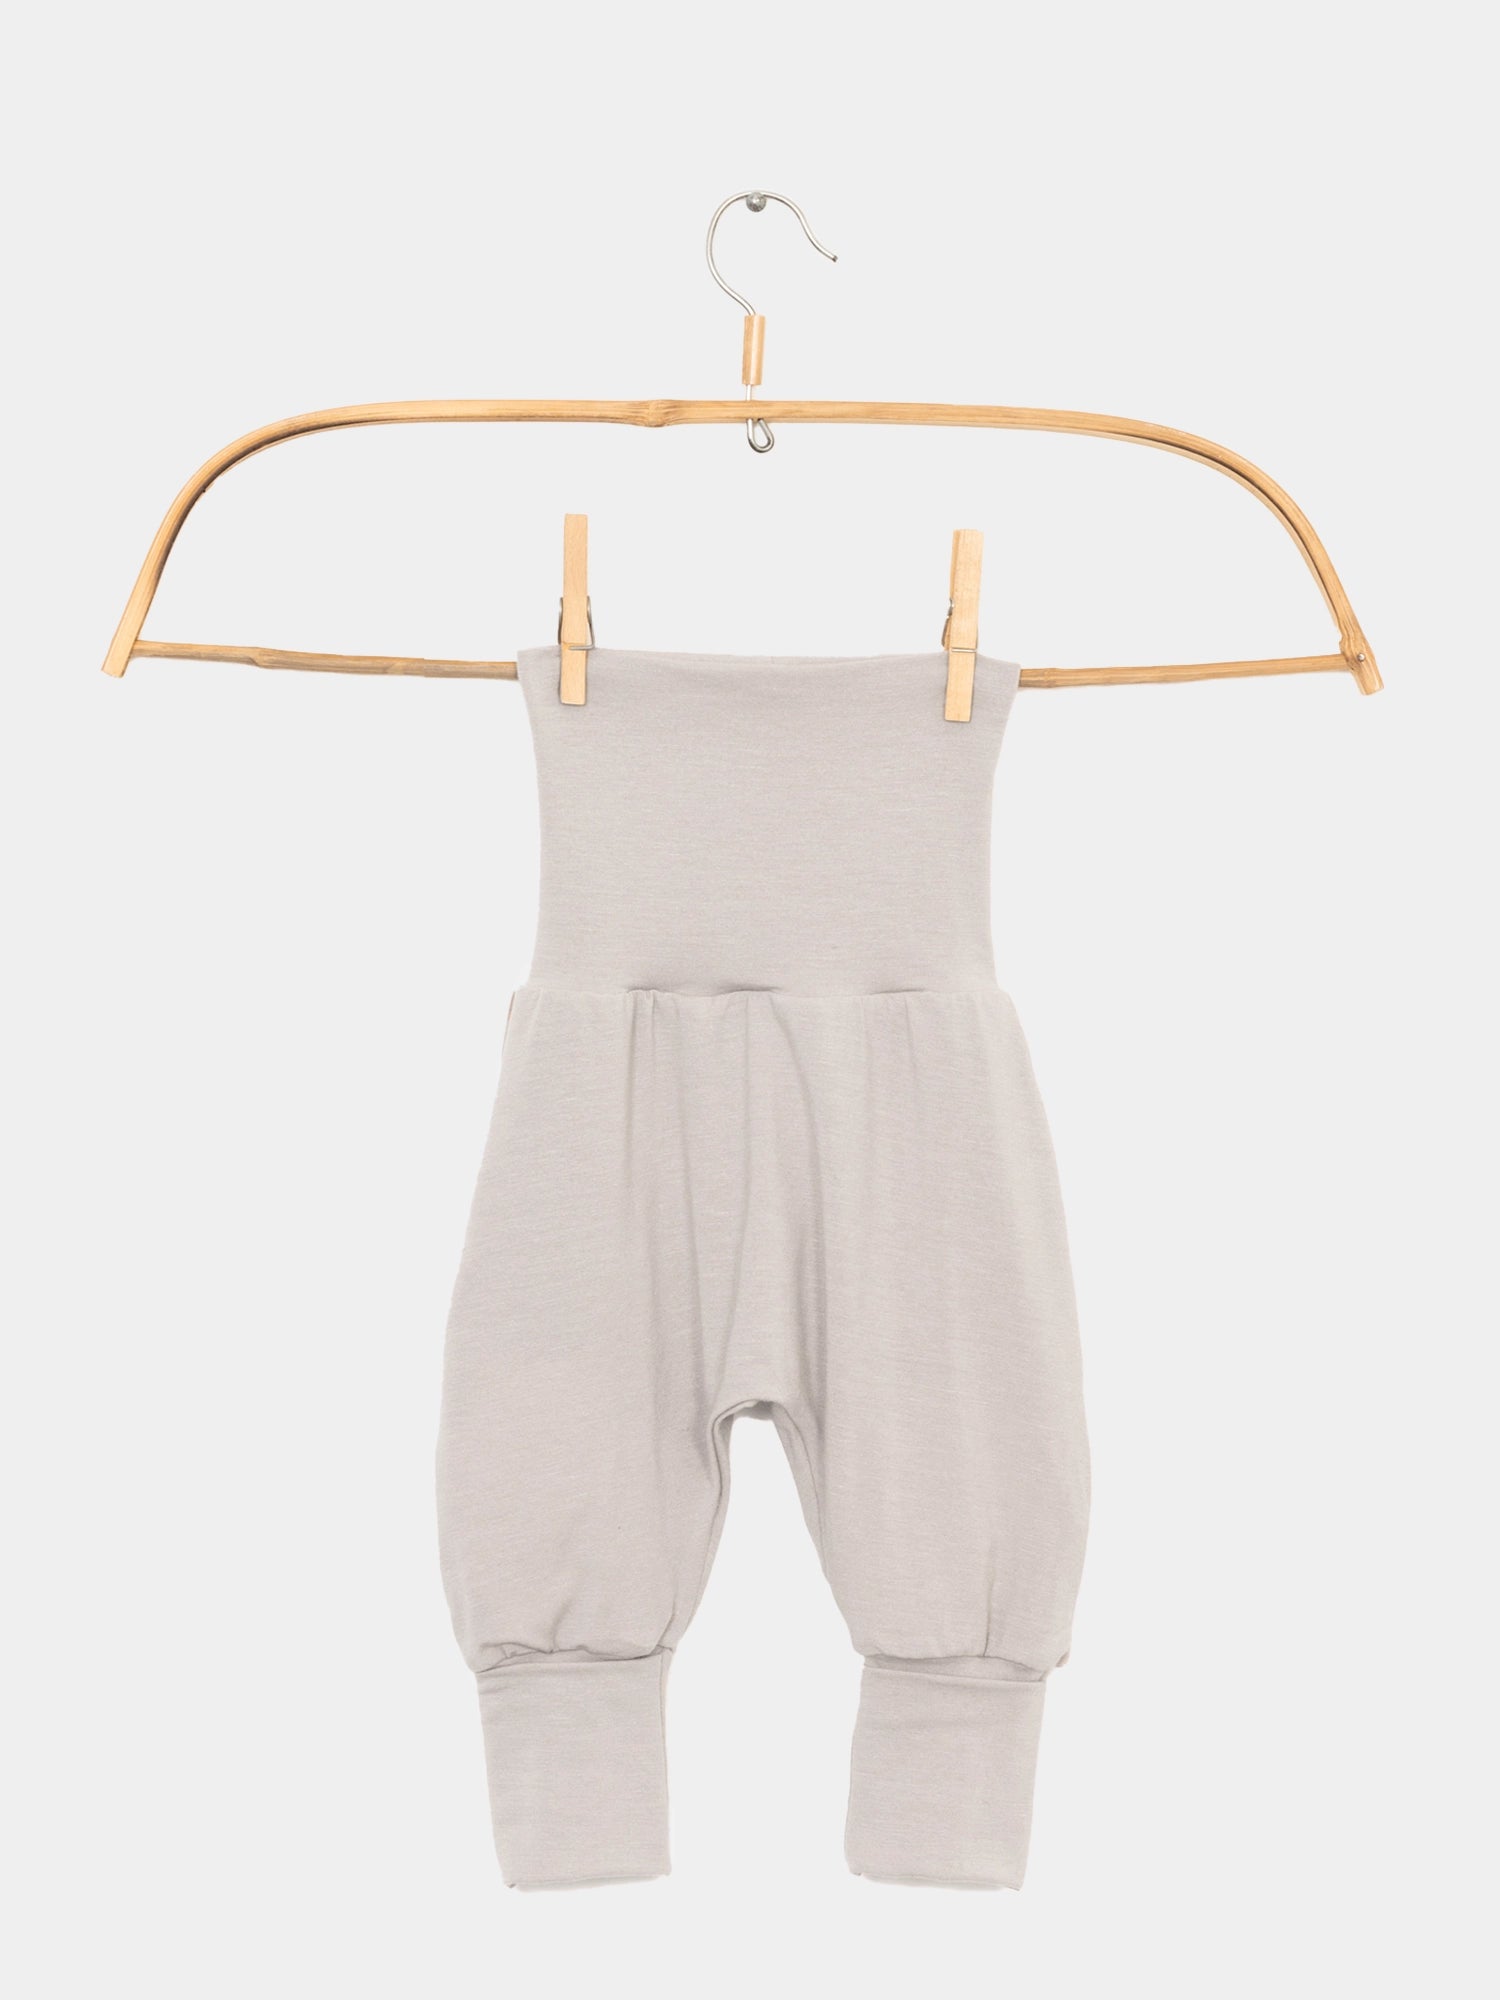 Baby knicker made of micromodal - stone